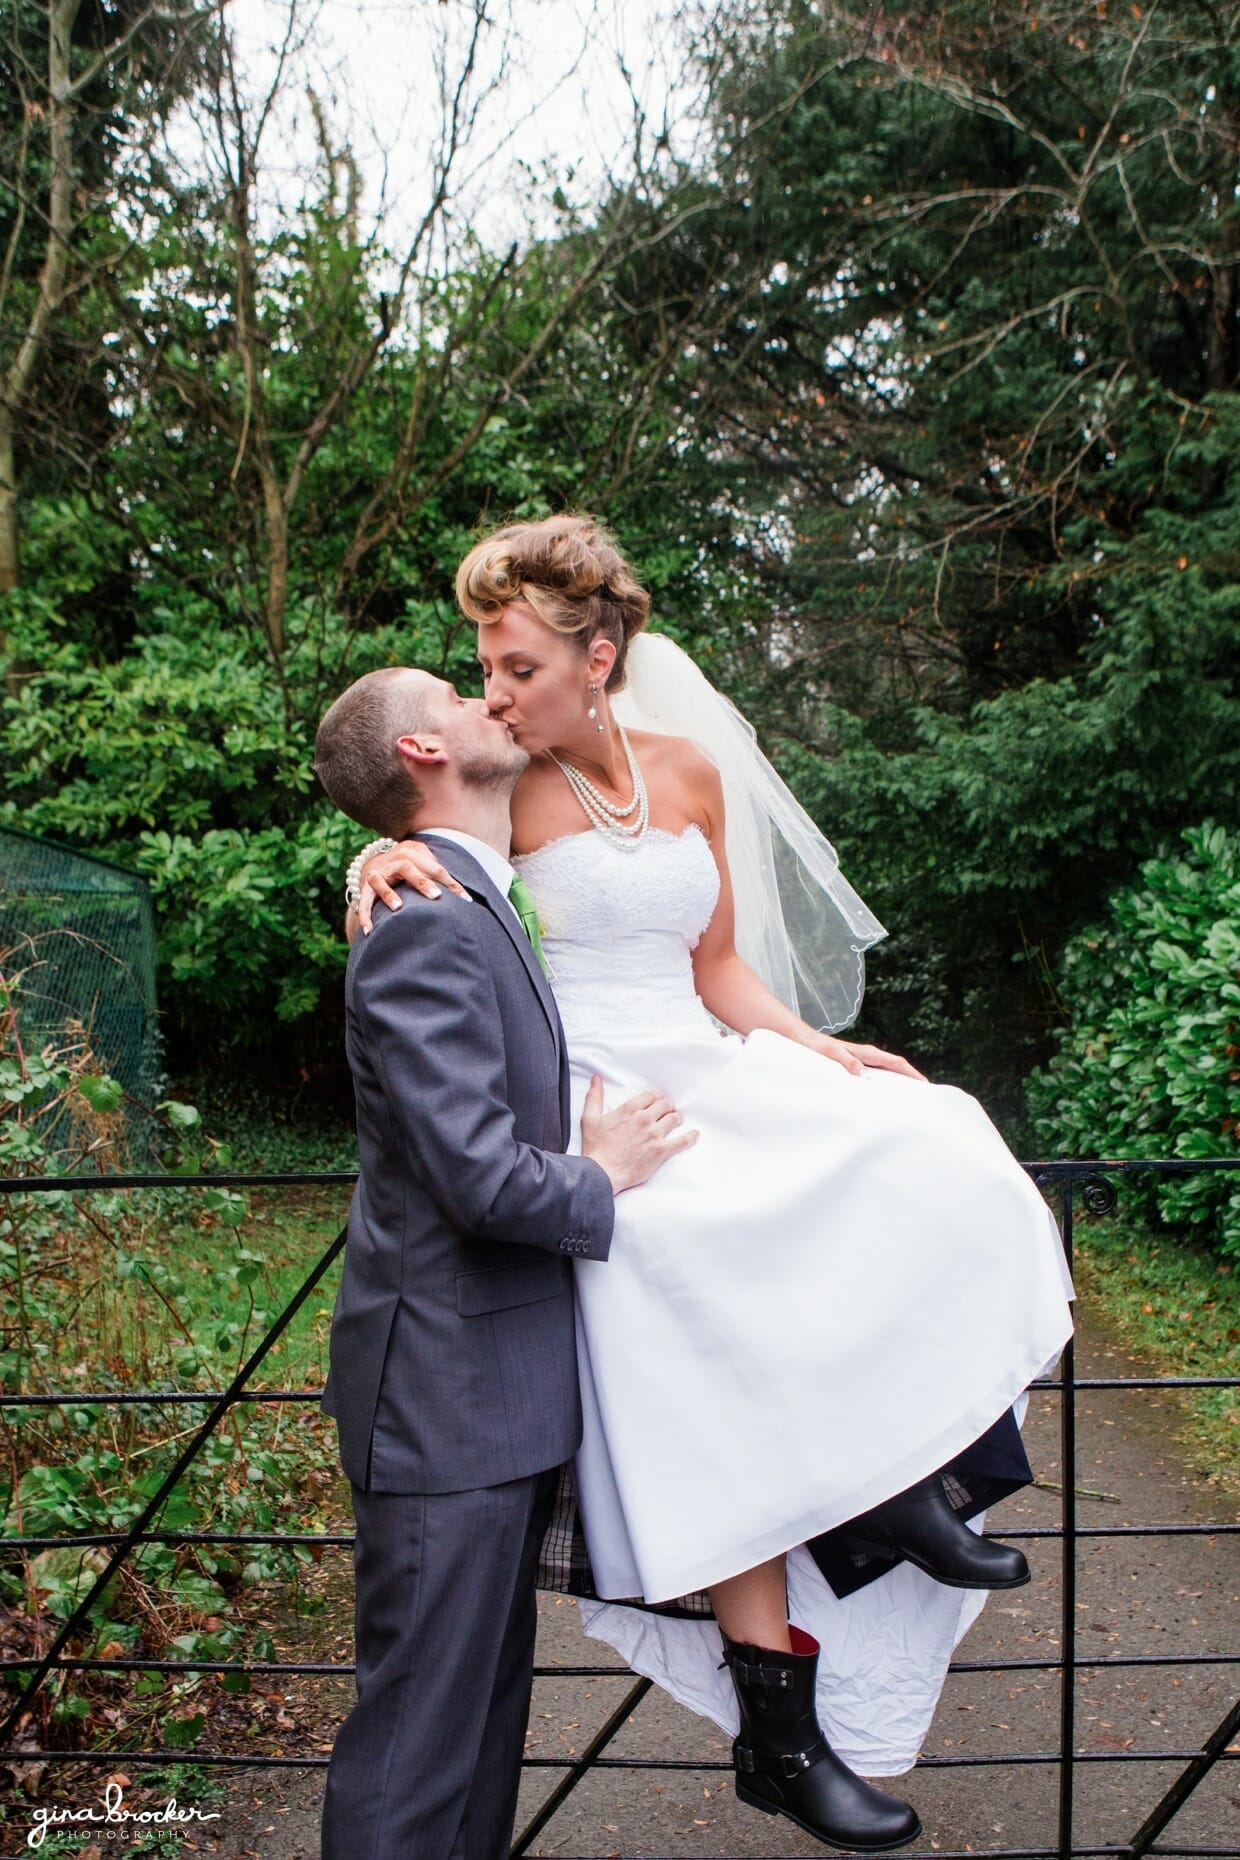 A sweet kiss between a bride and groom at their retro wedding